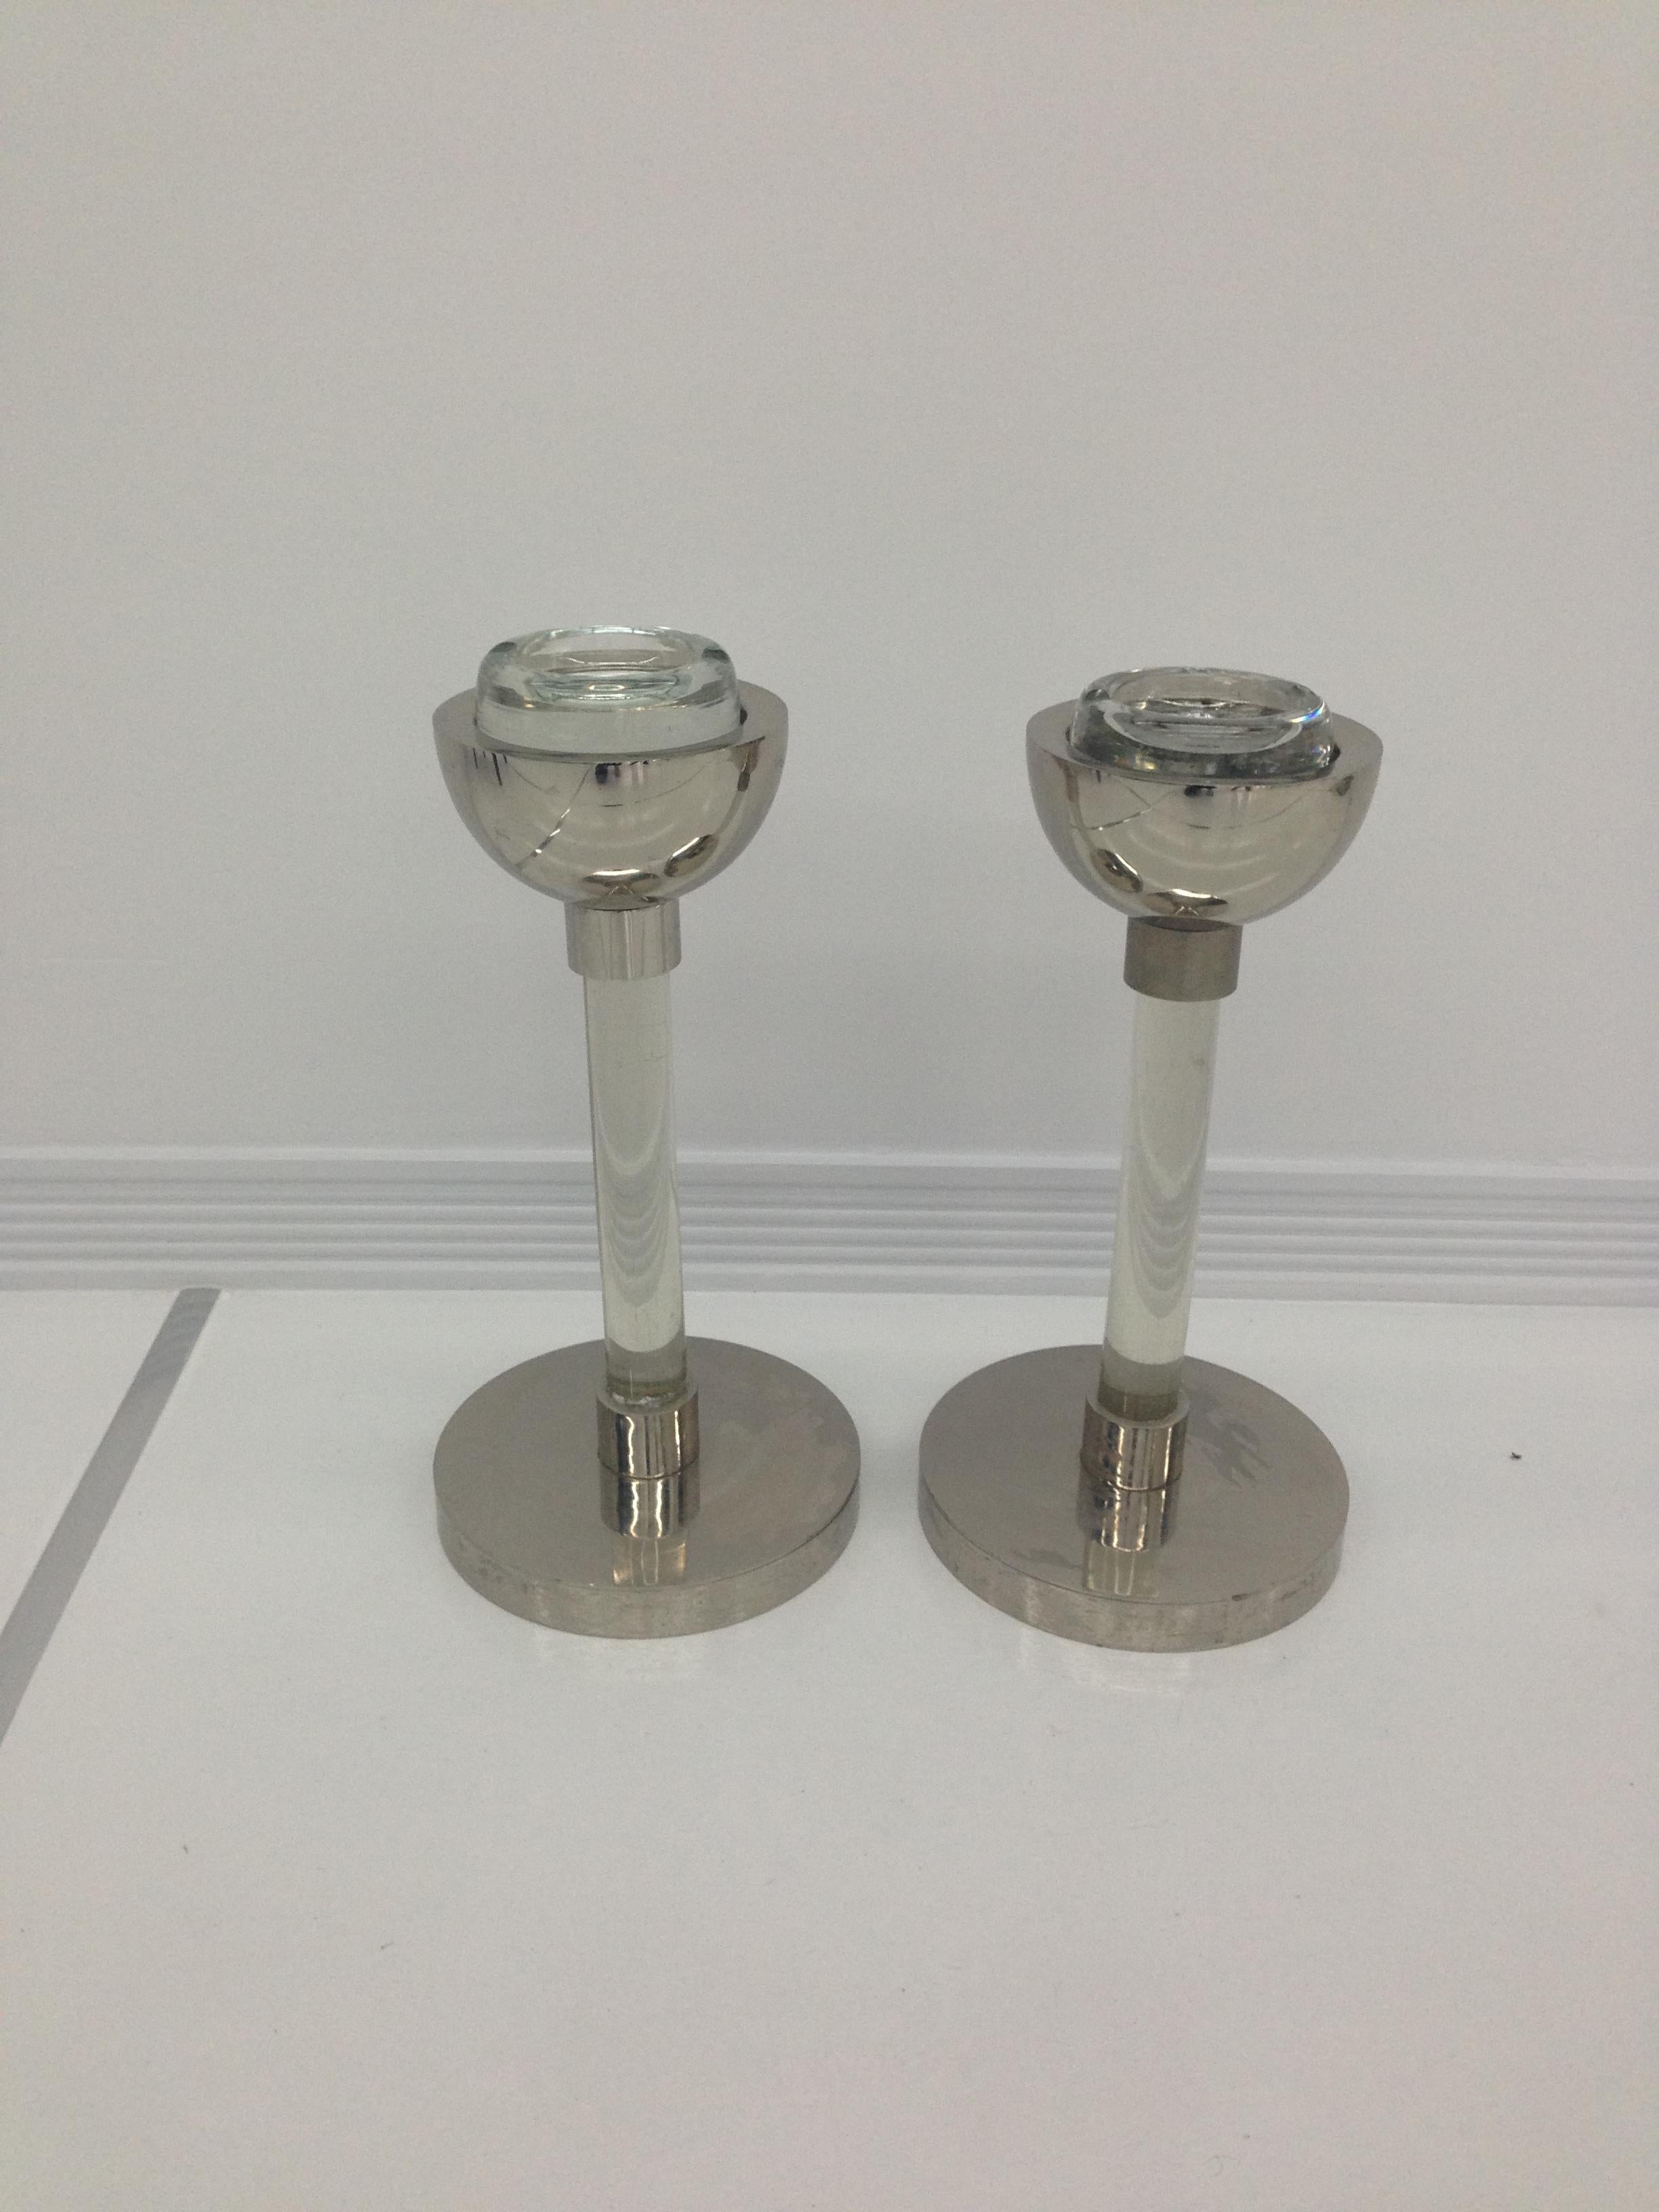 A pair of beautiful French Art Deco crystal glass and stainless steel ashtrays, circa 1920s.